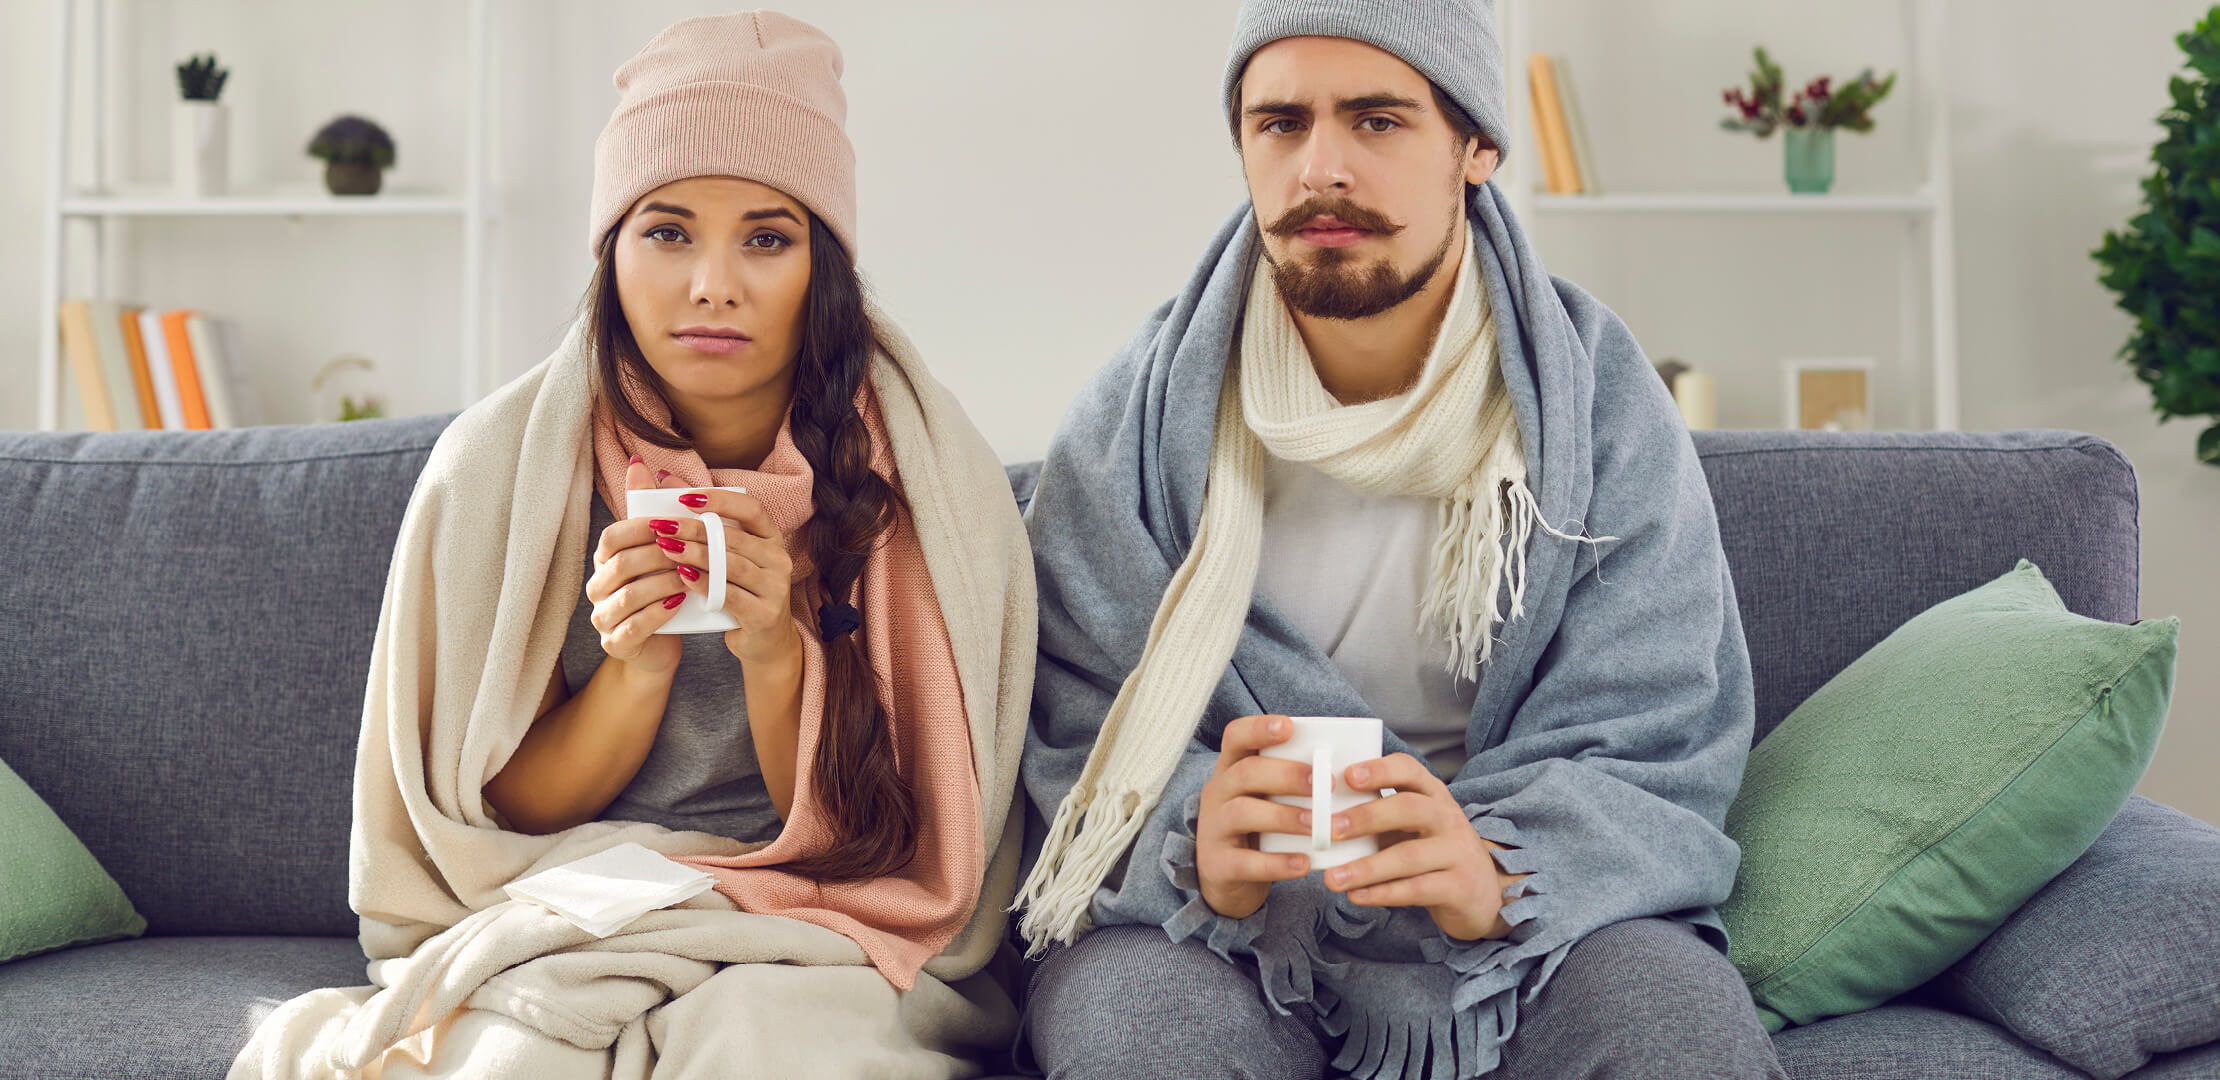 Couple bundled up and shivering on couch, holding warm beverages